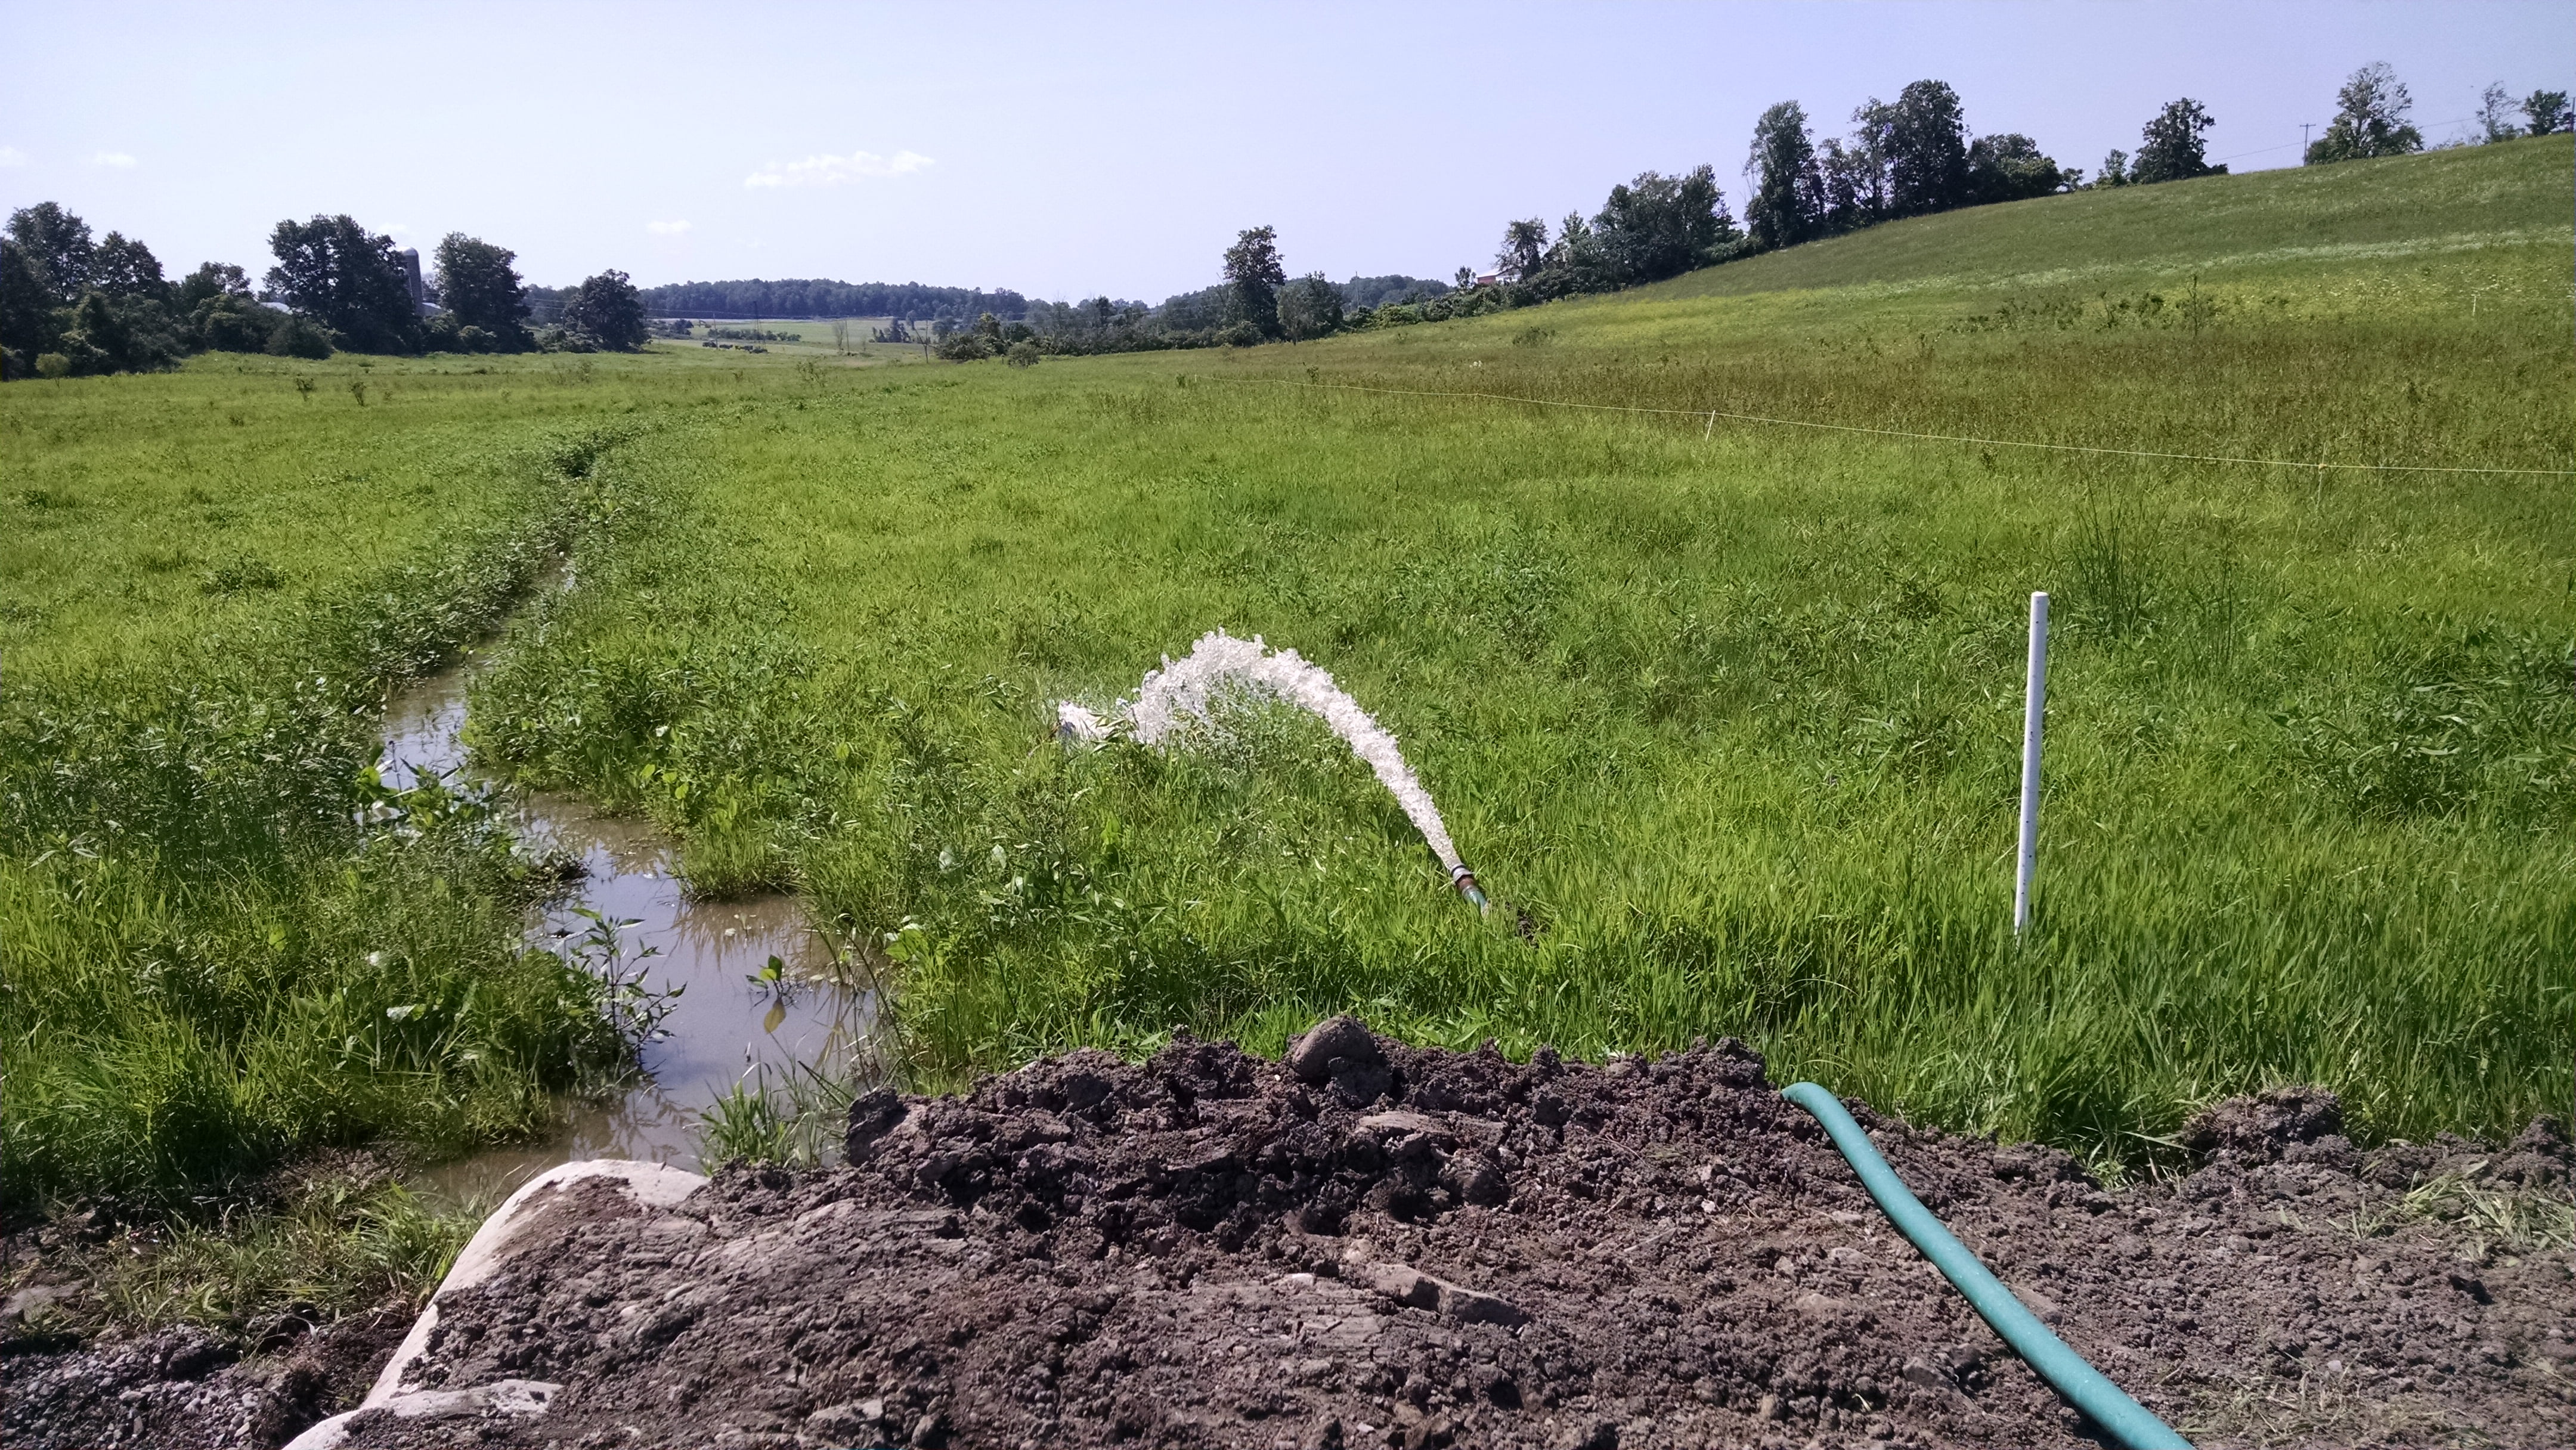 First we had to pump some of the water out of the small settling pond on the upstream side.